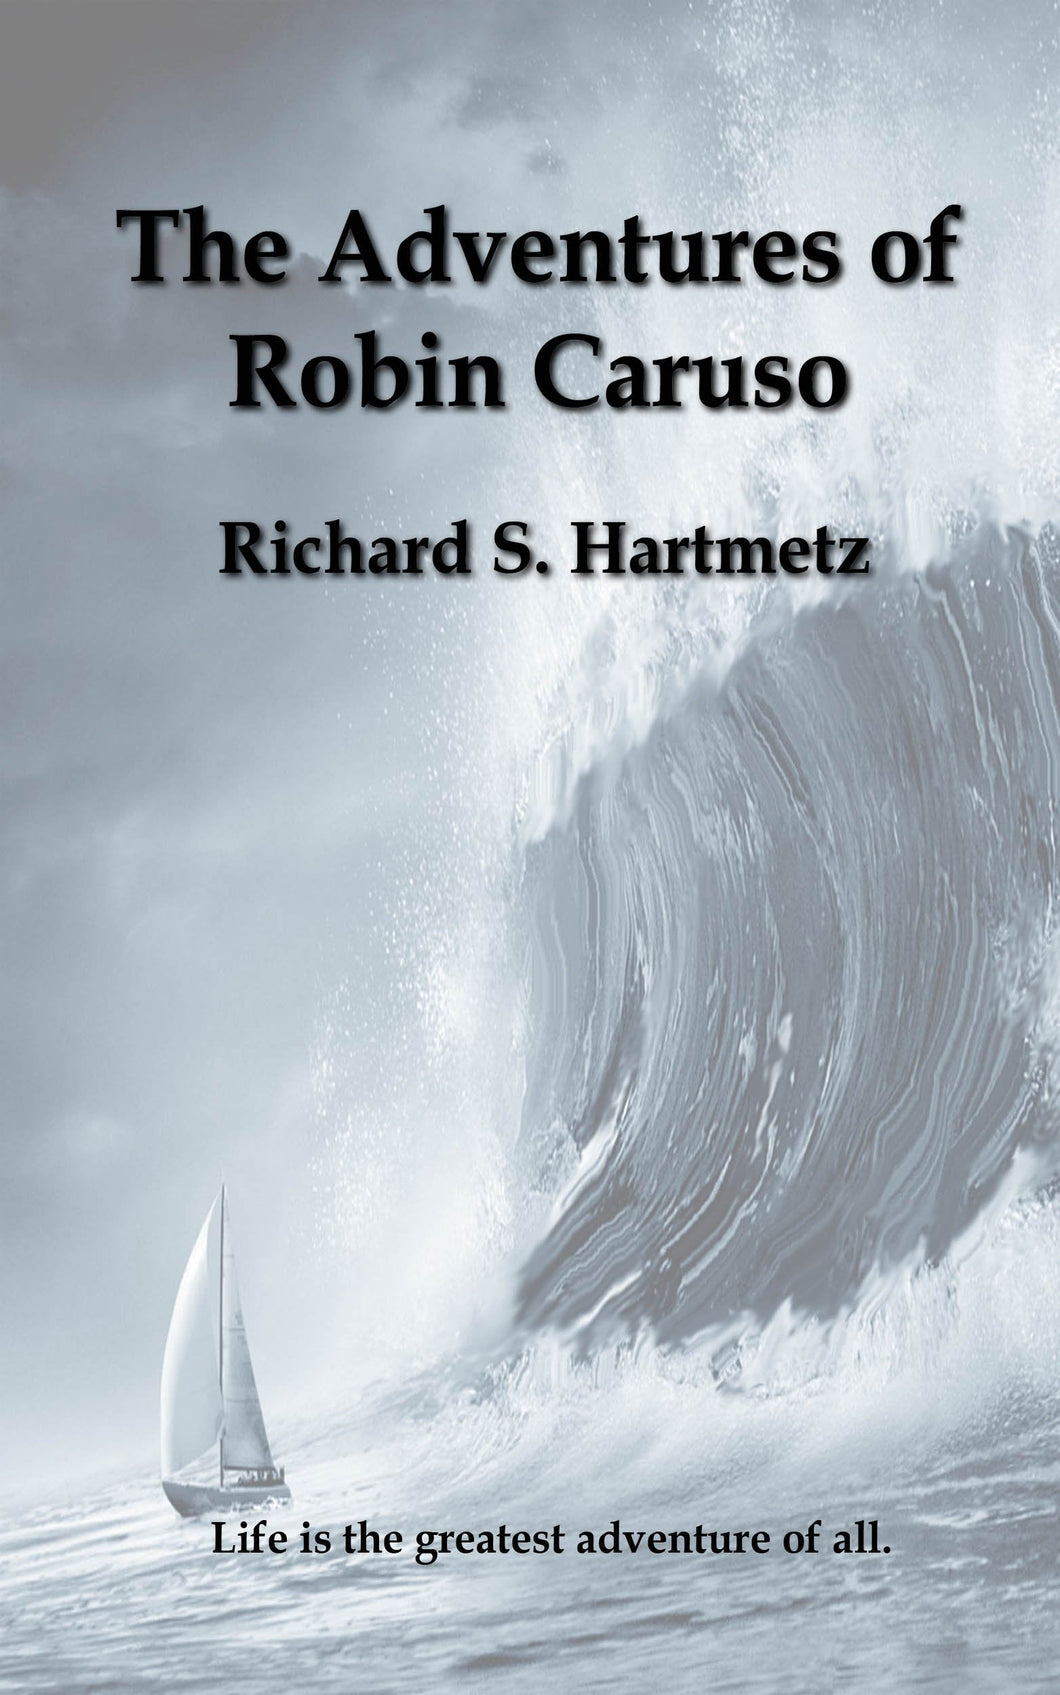 The Adventures of Robin Caruso - Starry Night Publishing